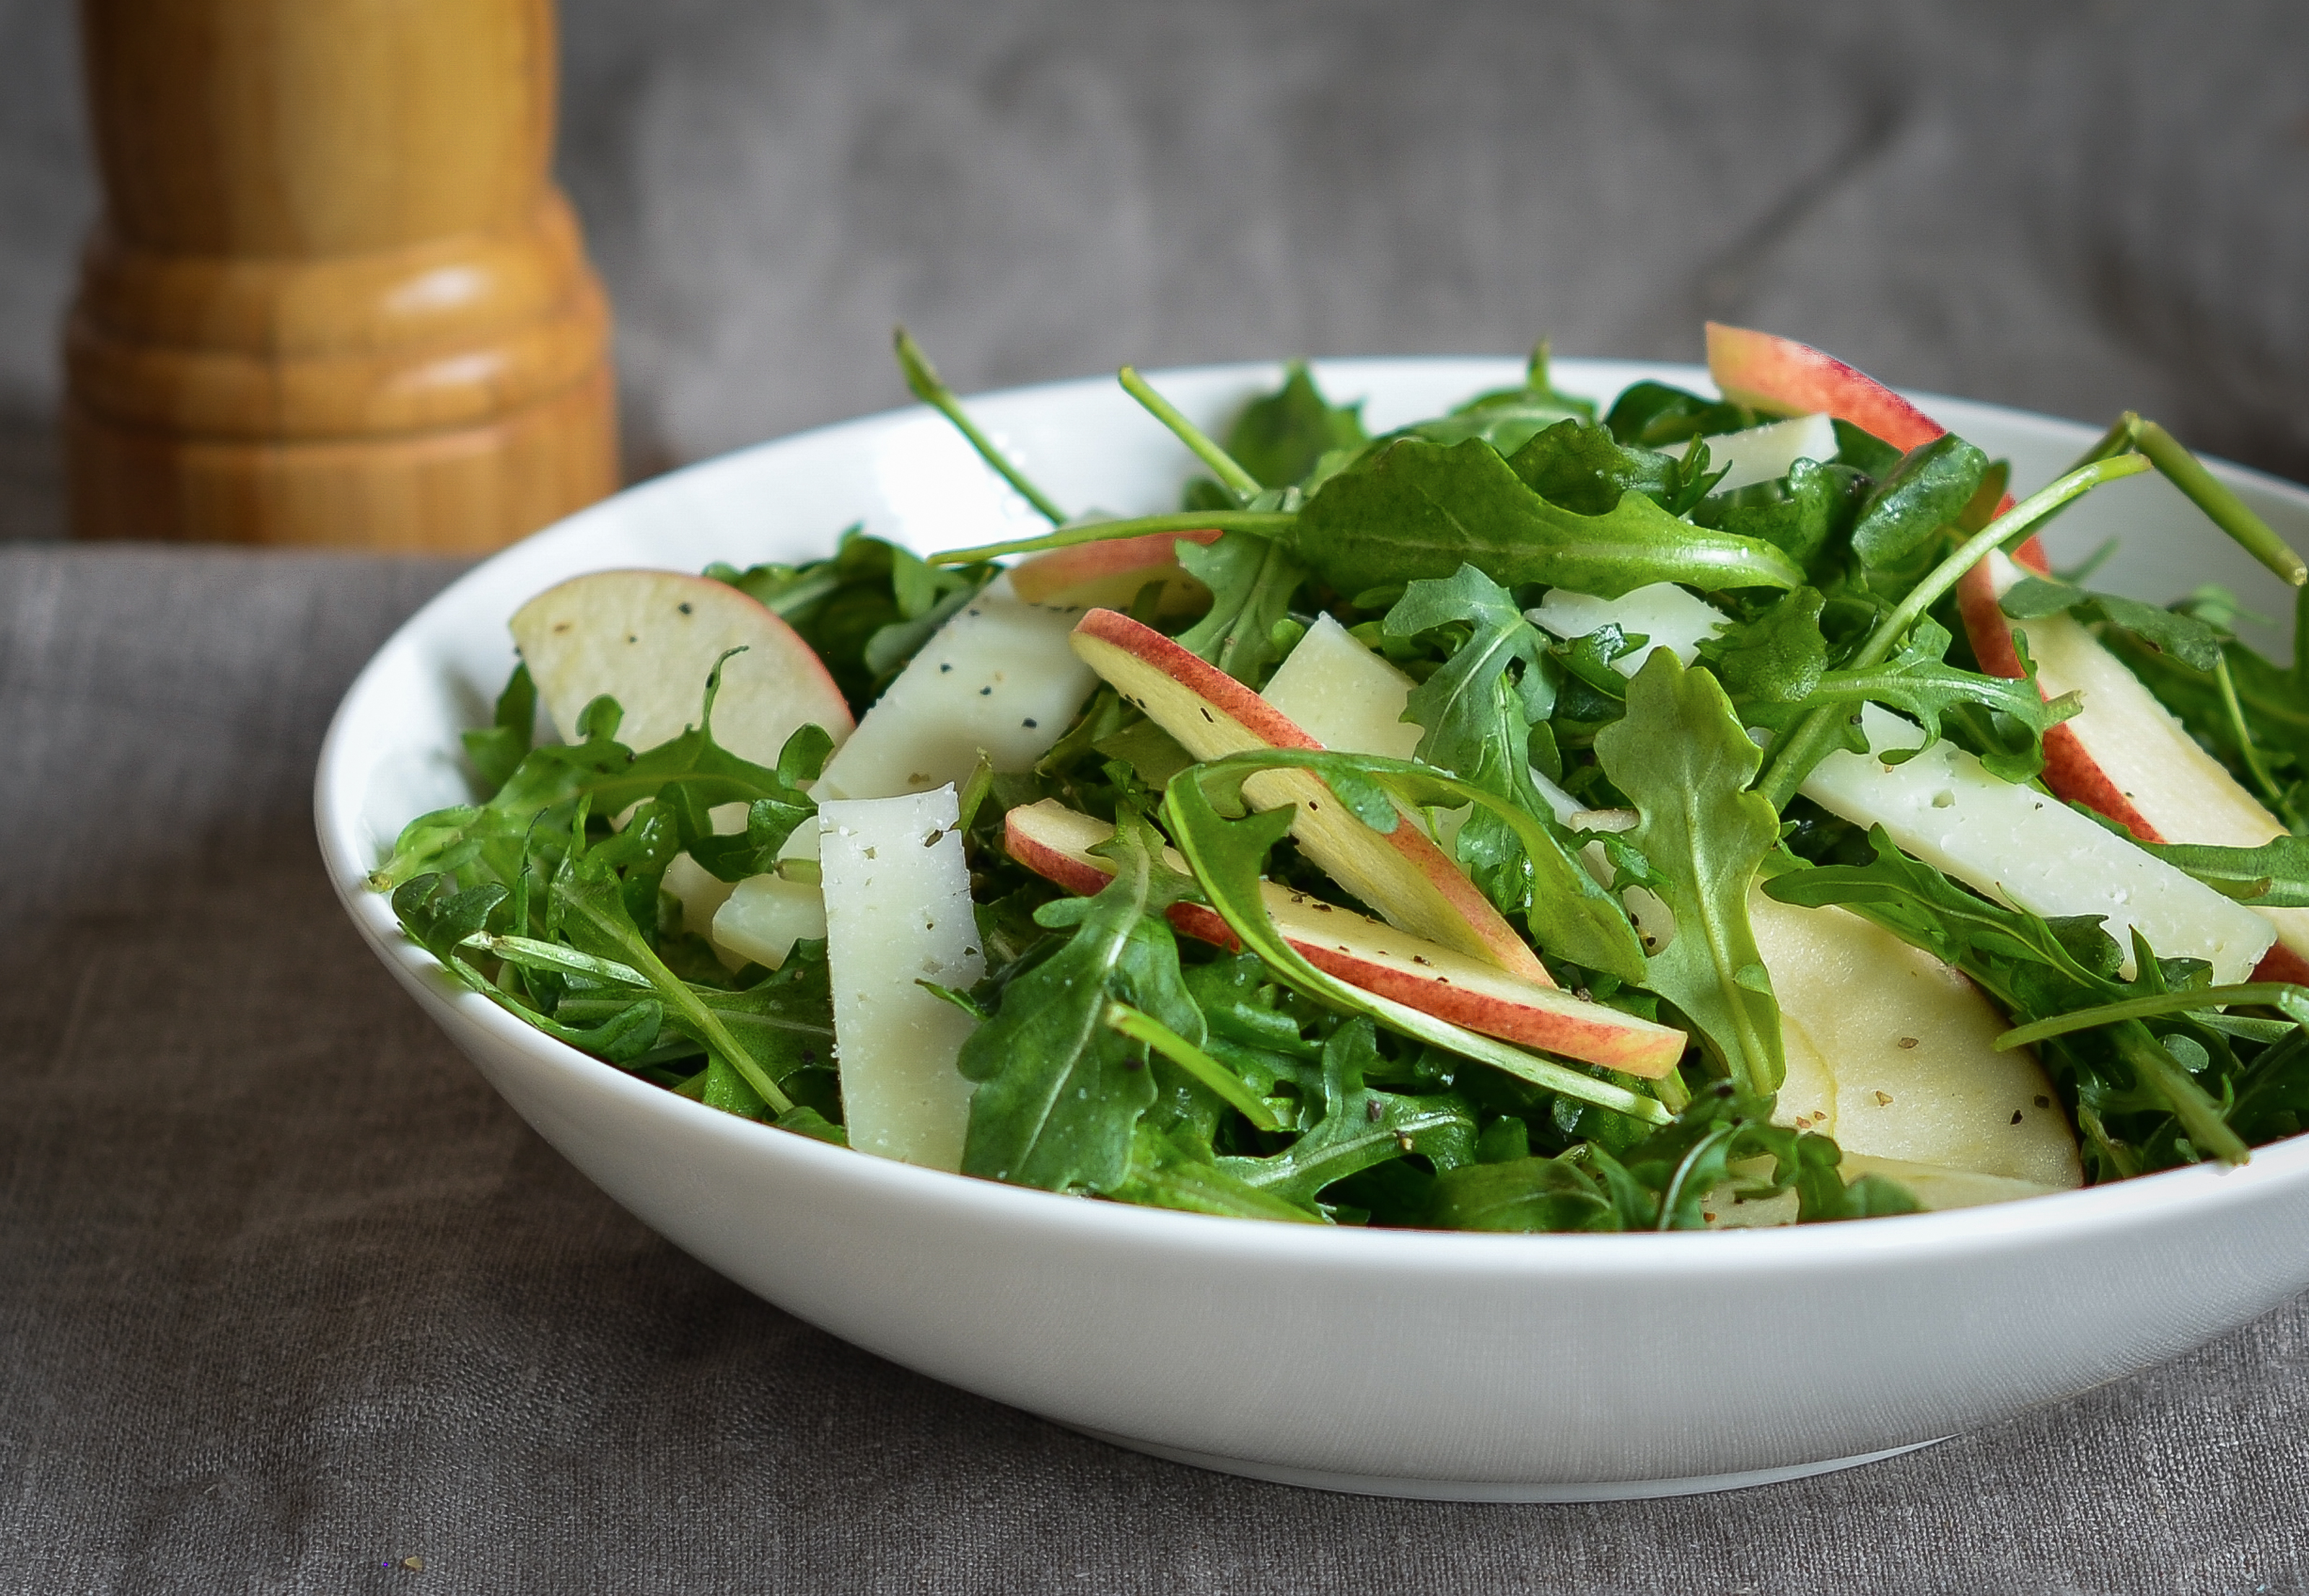 Green Salad With Apple Cider Vinaigrette Recipe - NYT Cooking